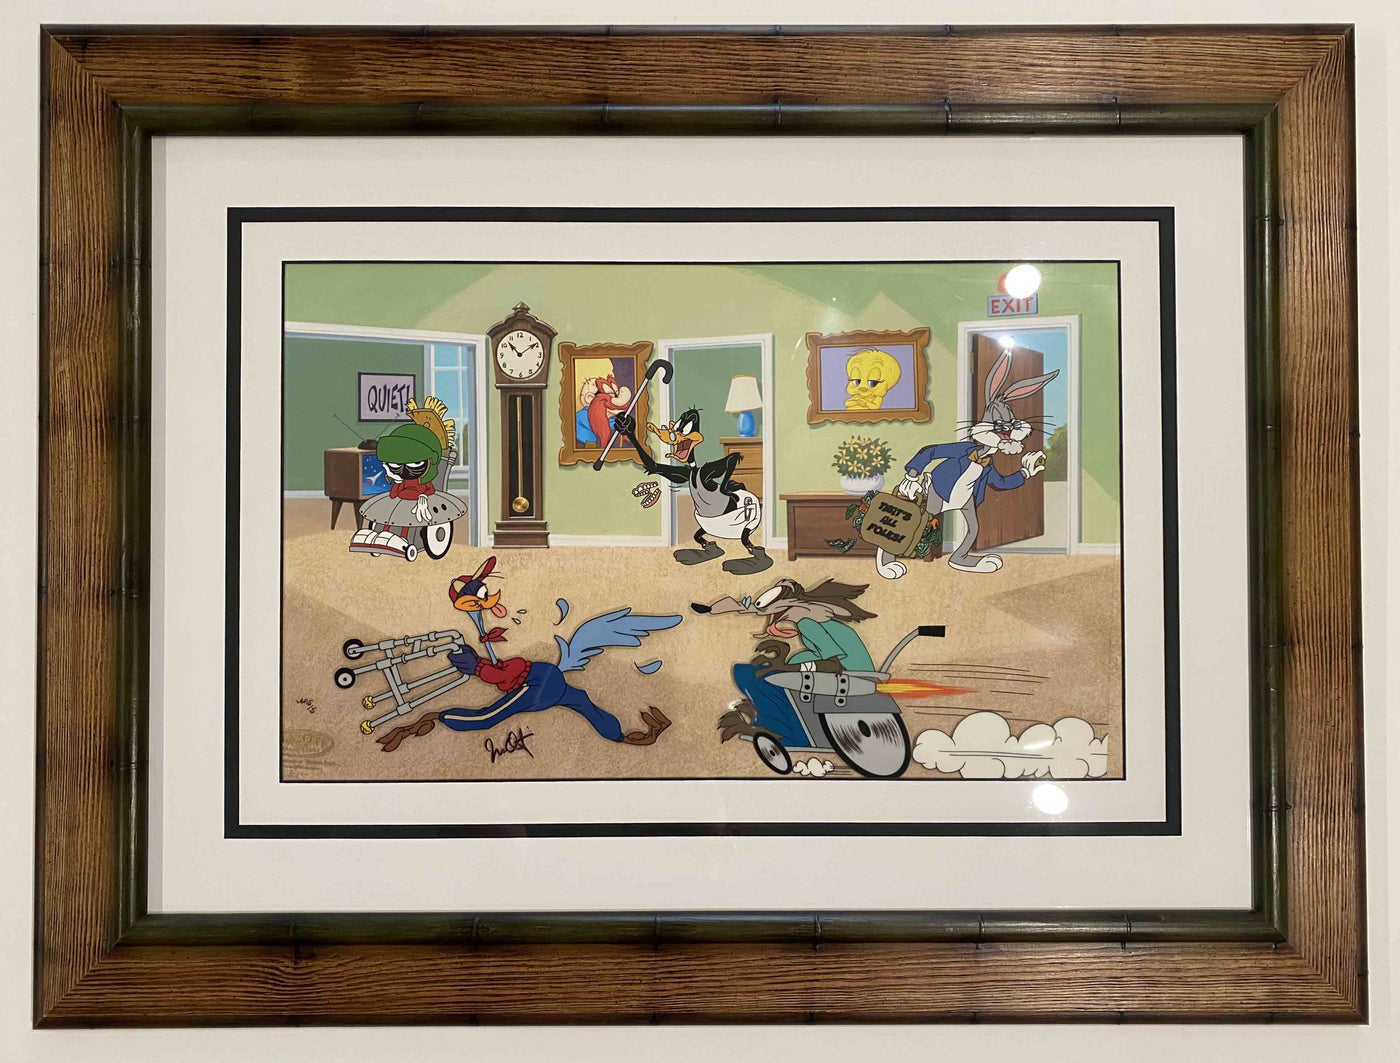 Warner Brothers "Acme Retirement Home" Limited Edition Cel Signed by Juan Ortiz